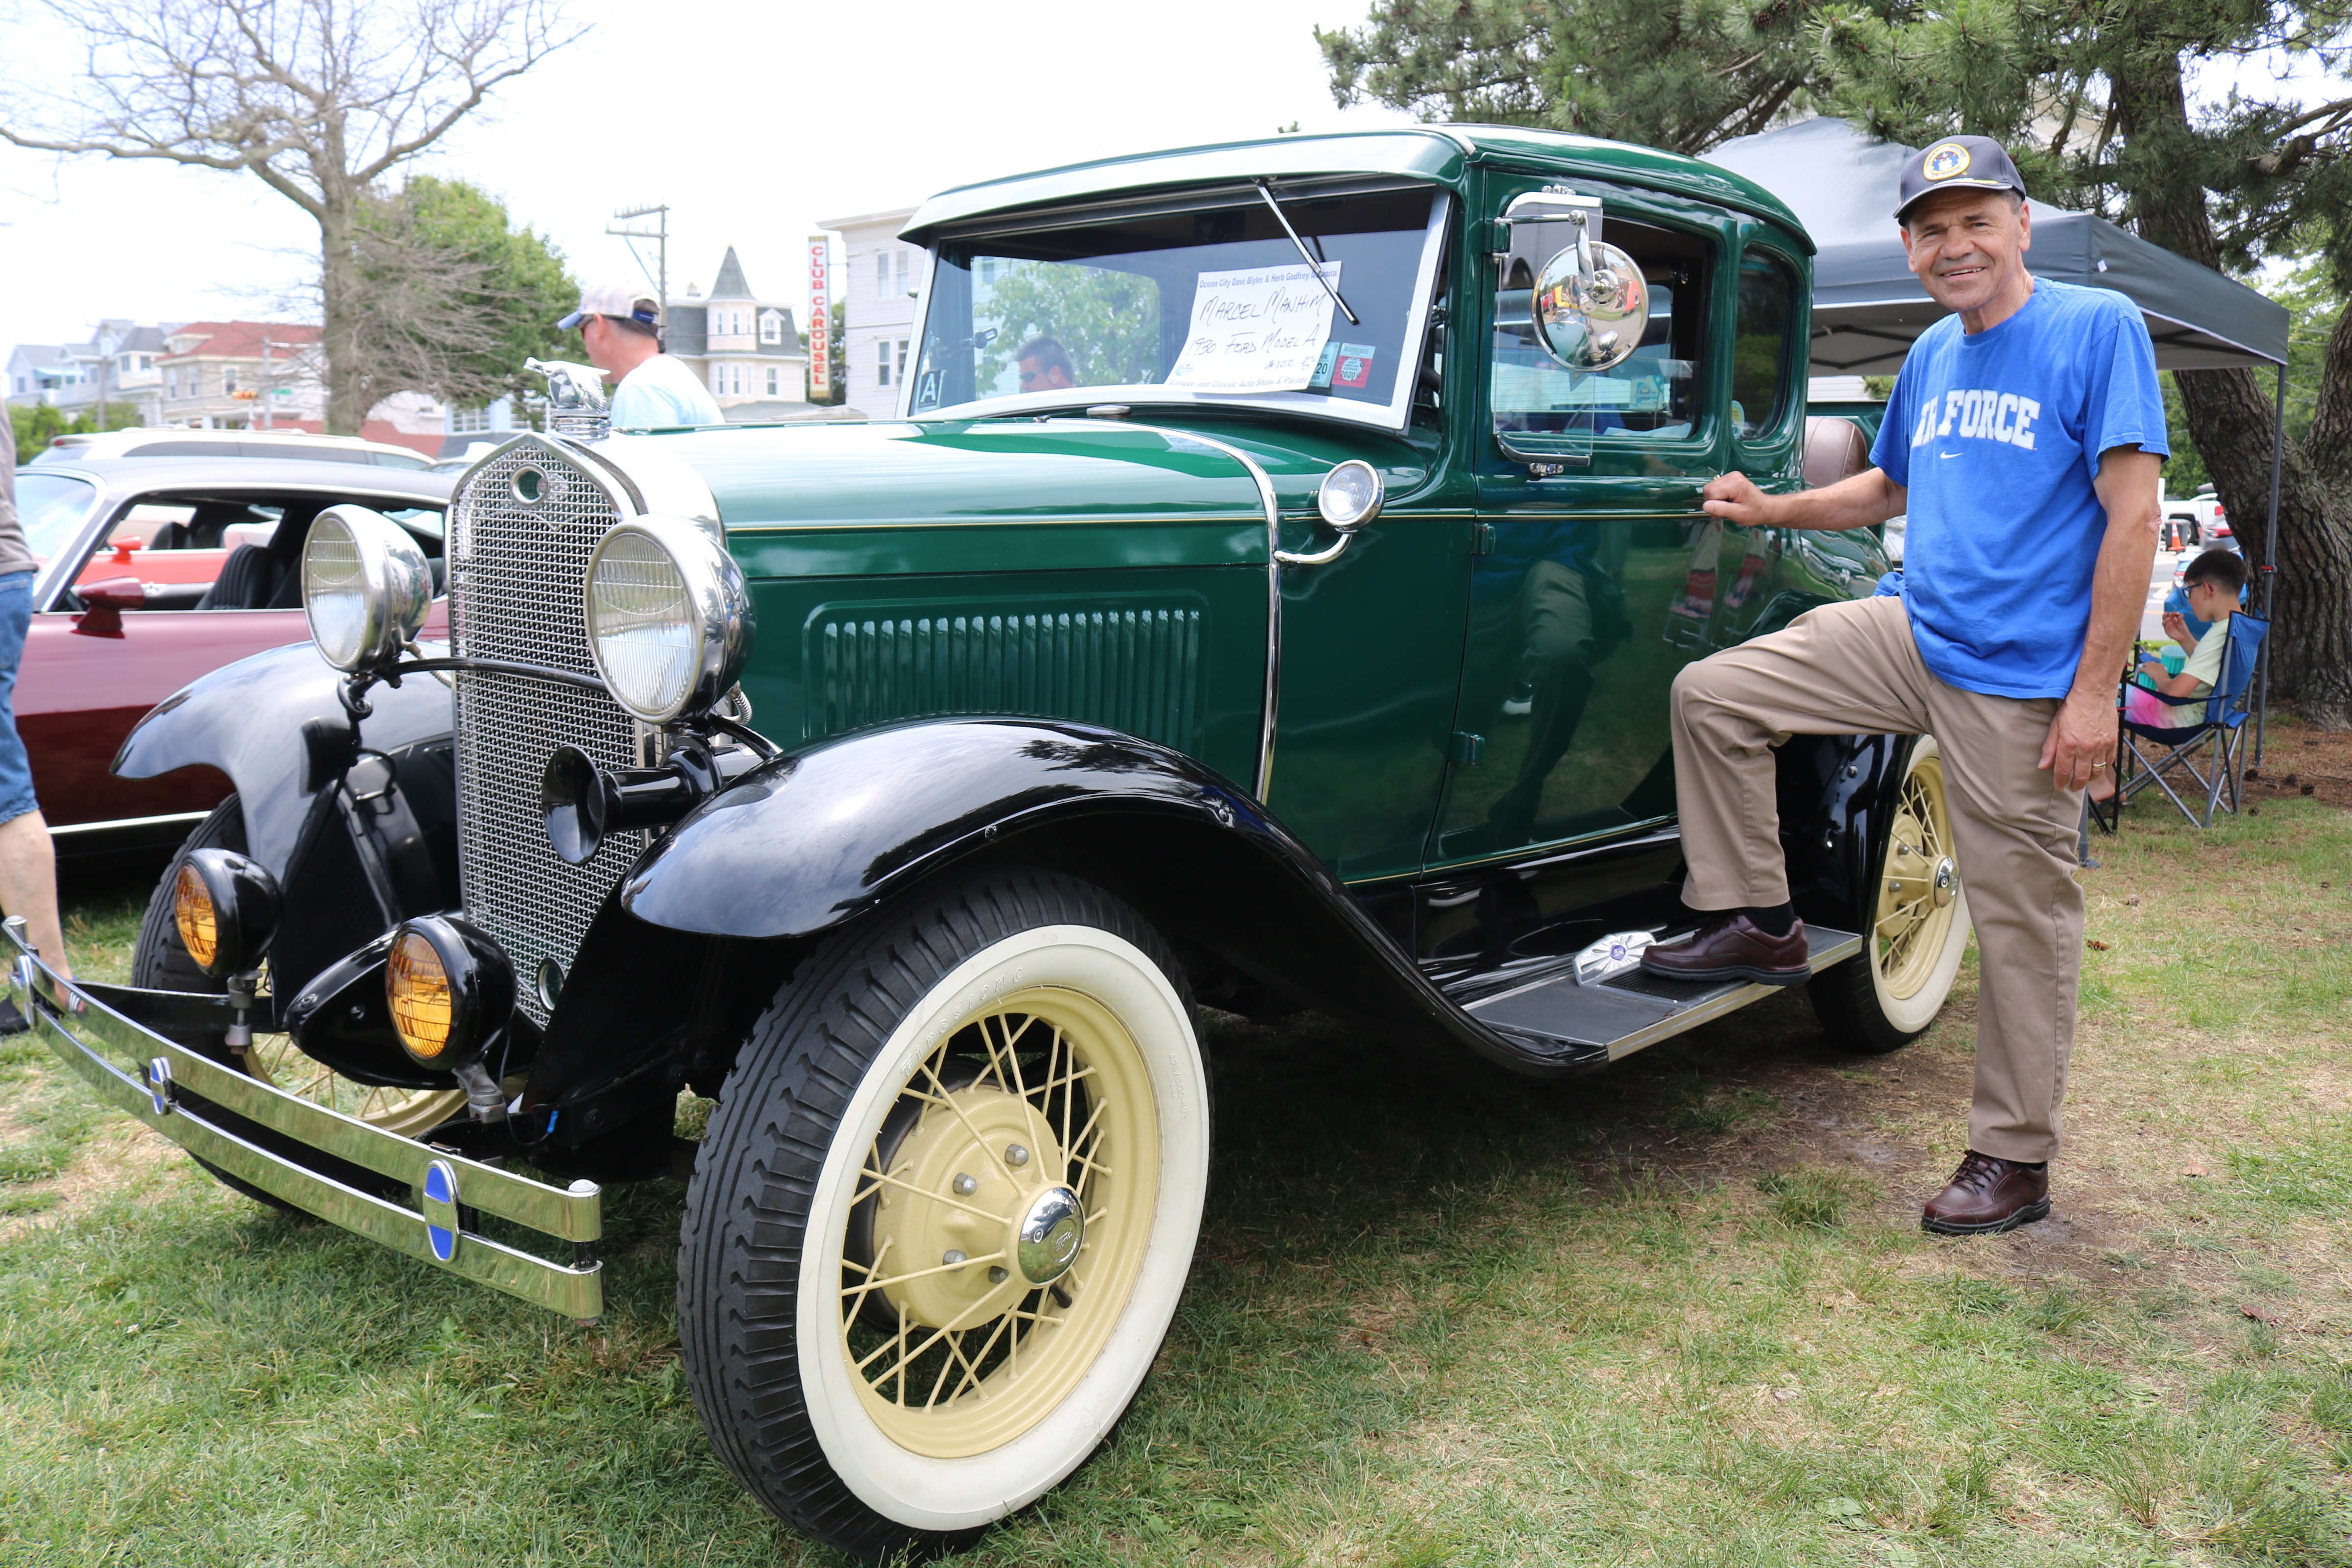 Vintage Car Show Gives Glimpse of History